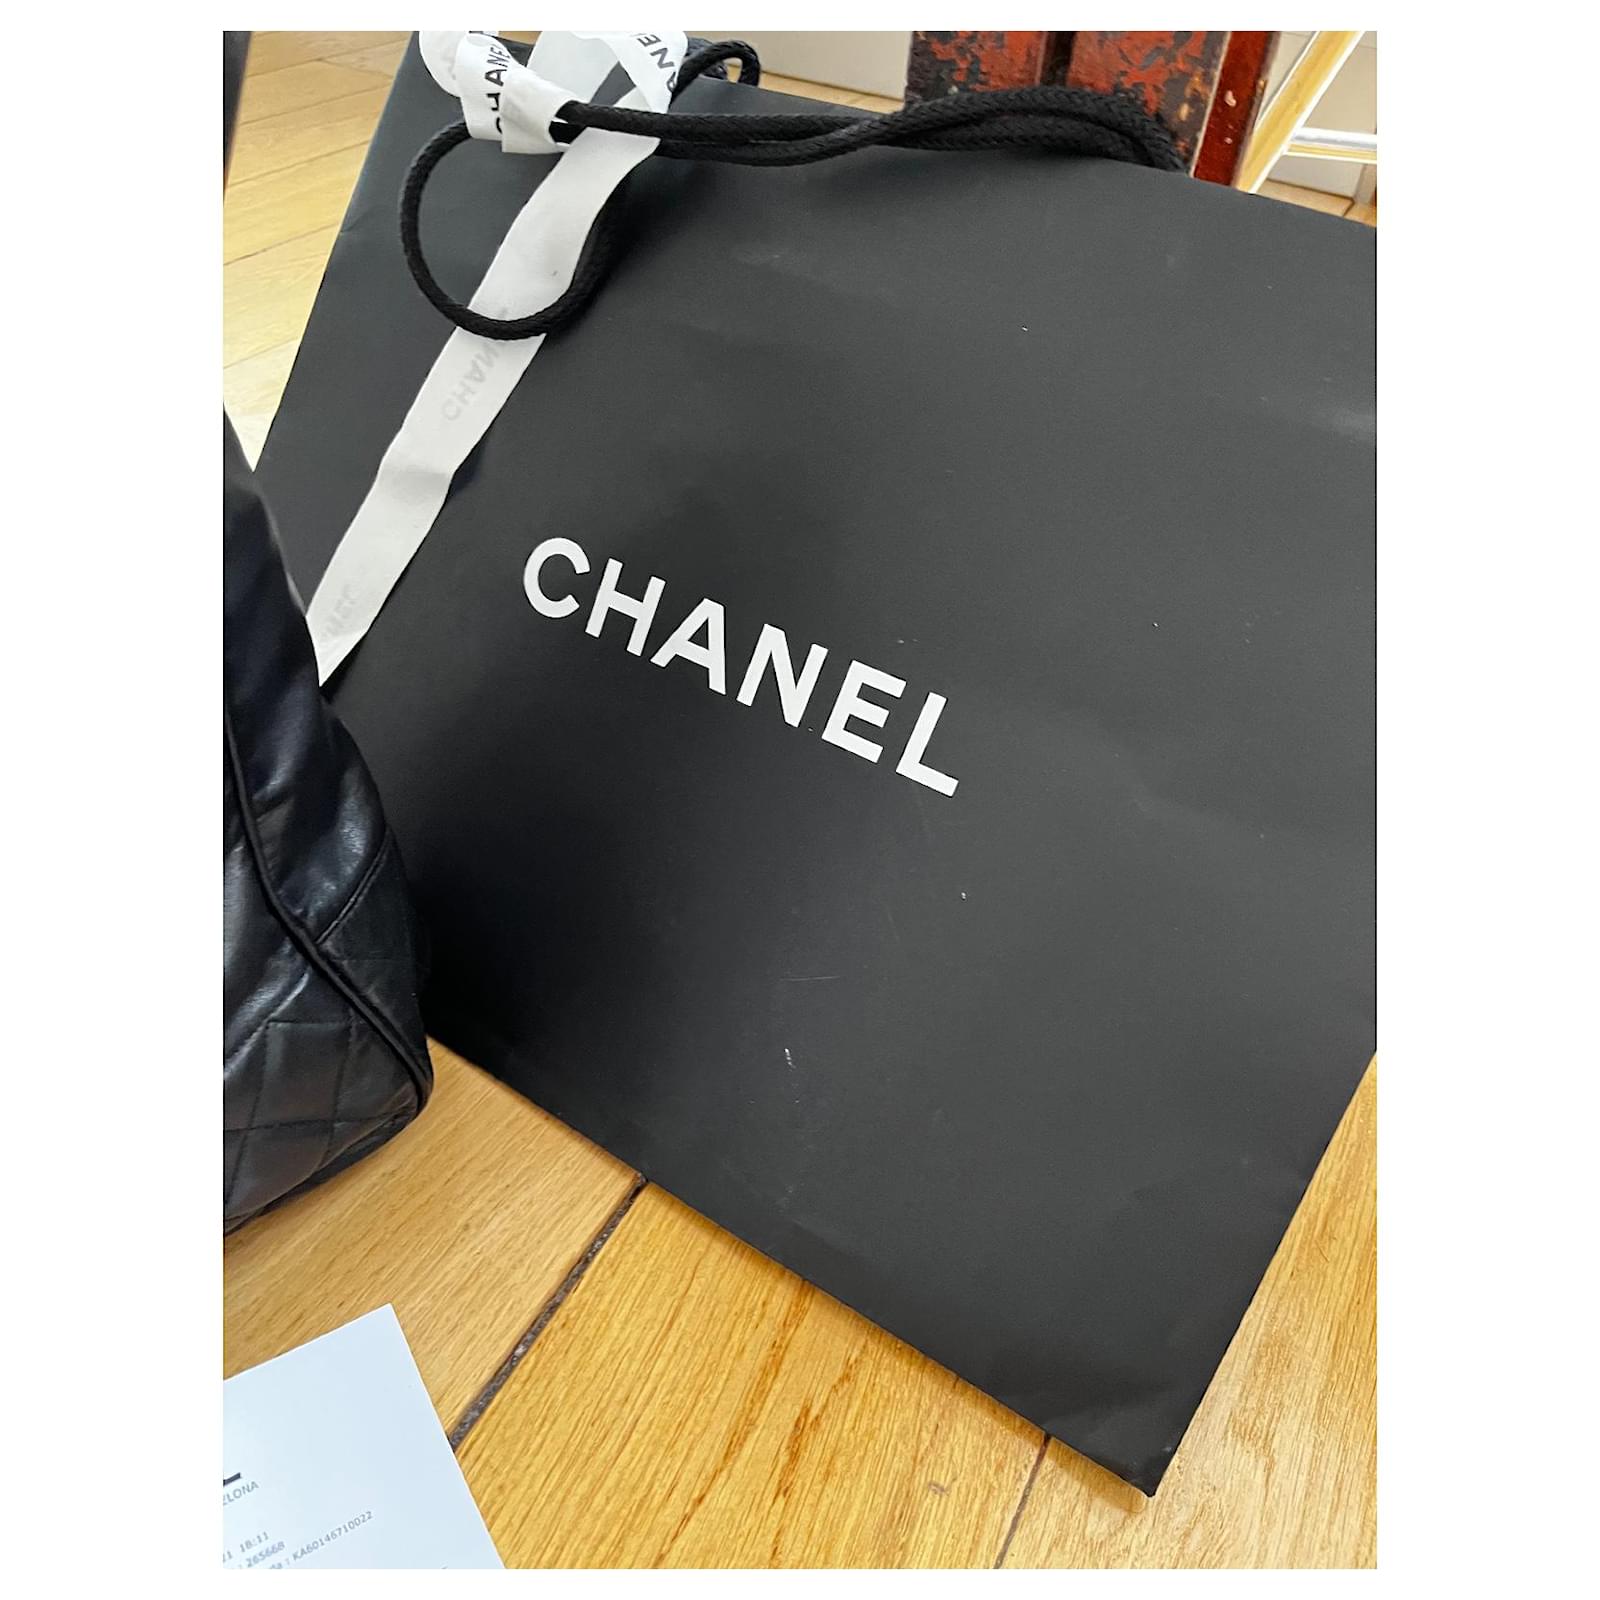 Not only fake handbags, but there are also Chanel fake dust bags